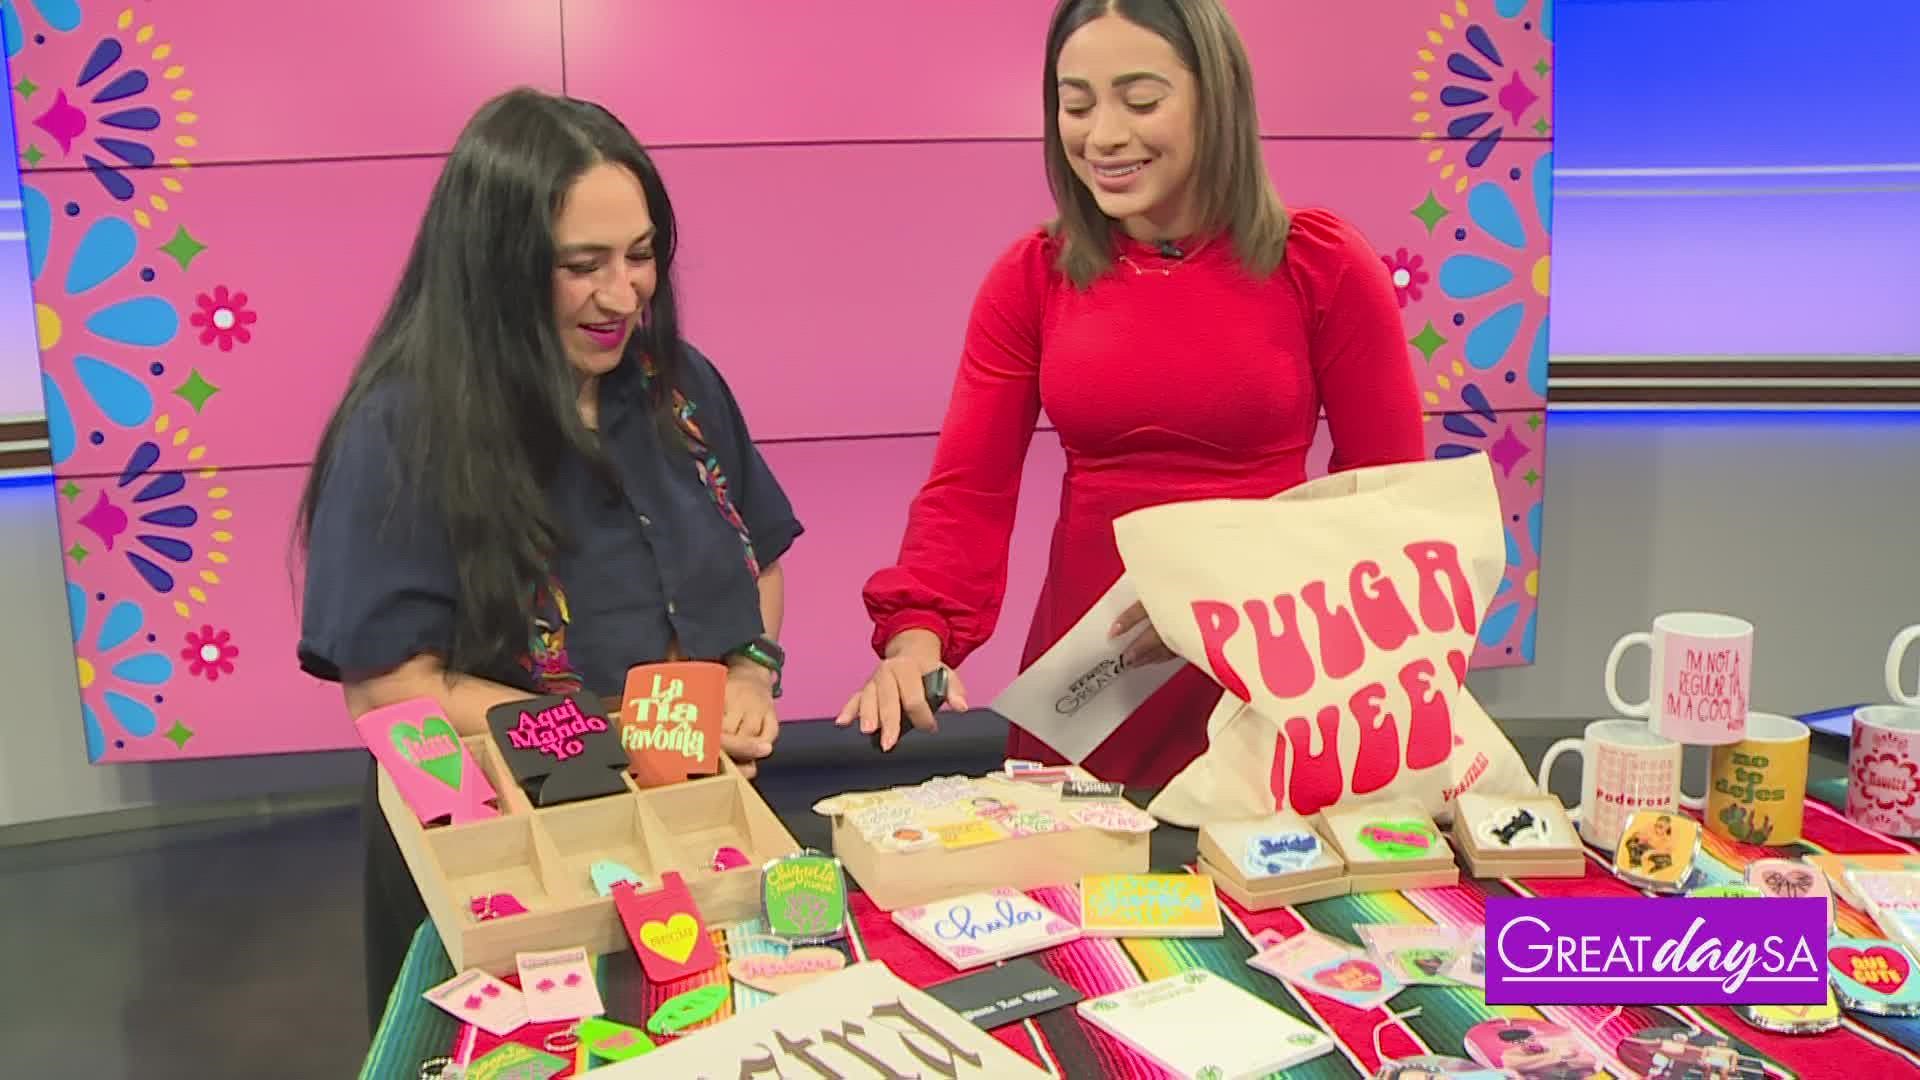 There's a one-stop Chicana shop with unique items and sayings! Meet the owner of “Very That” that's giving them an extra flare!